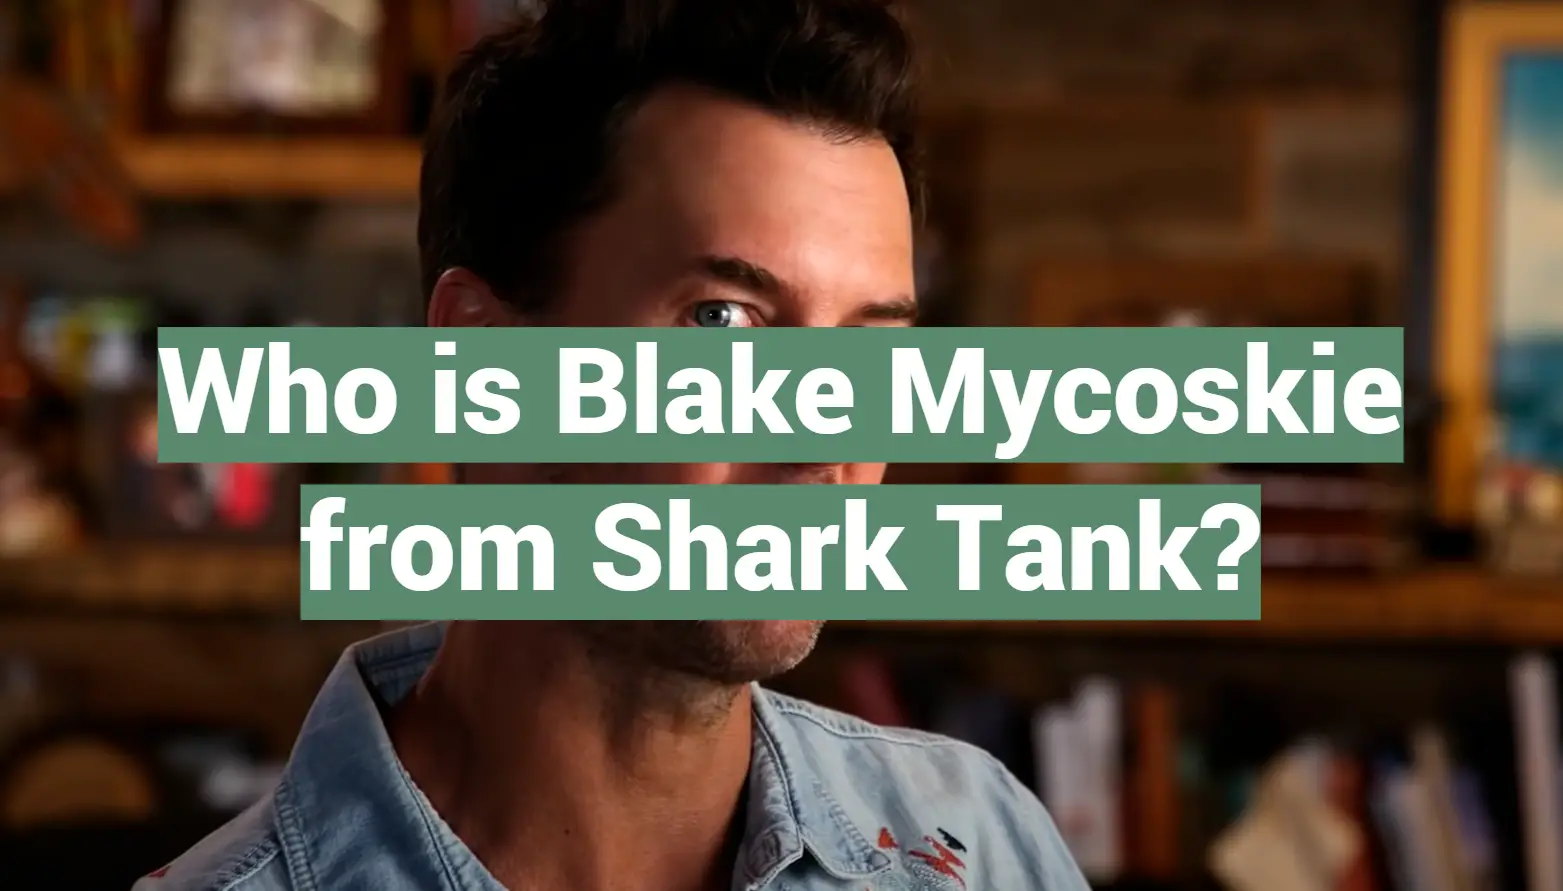 Who is Blake Mycoskie from Shark Tank?